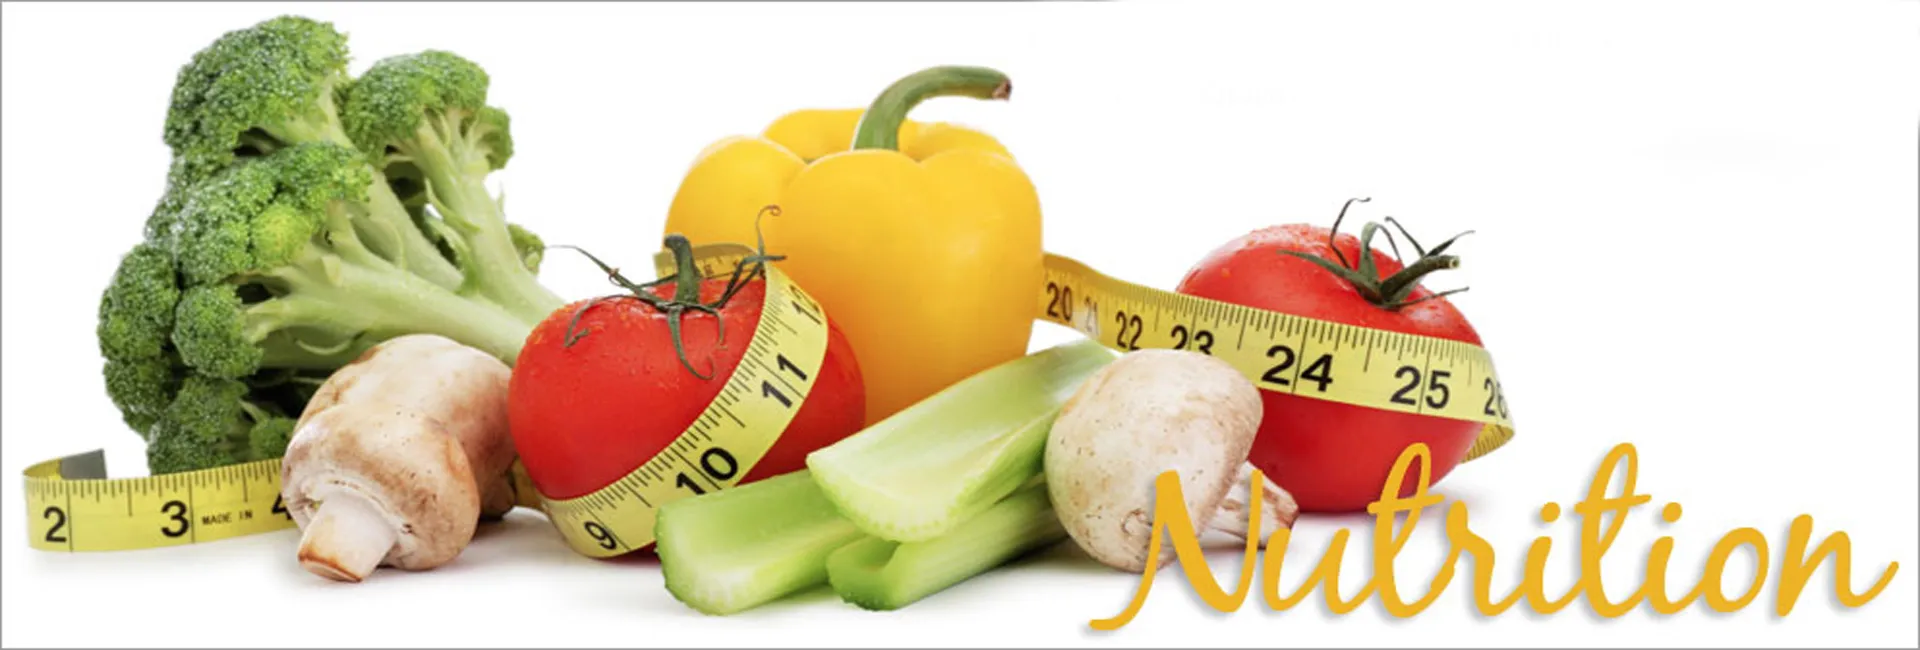 Diet For Sports Nutrition In Fujairah